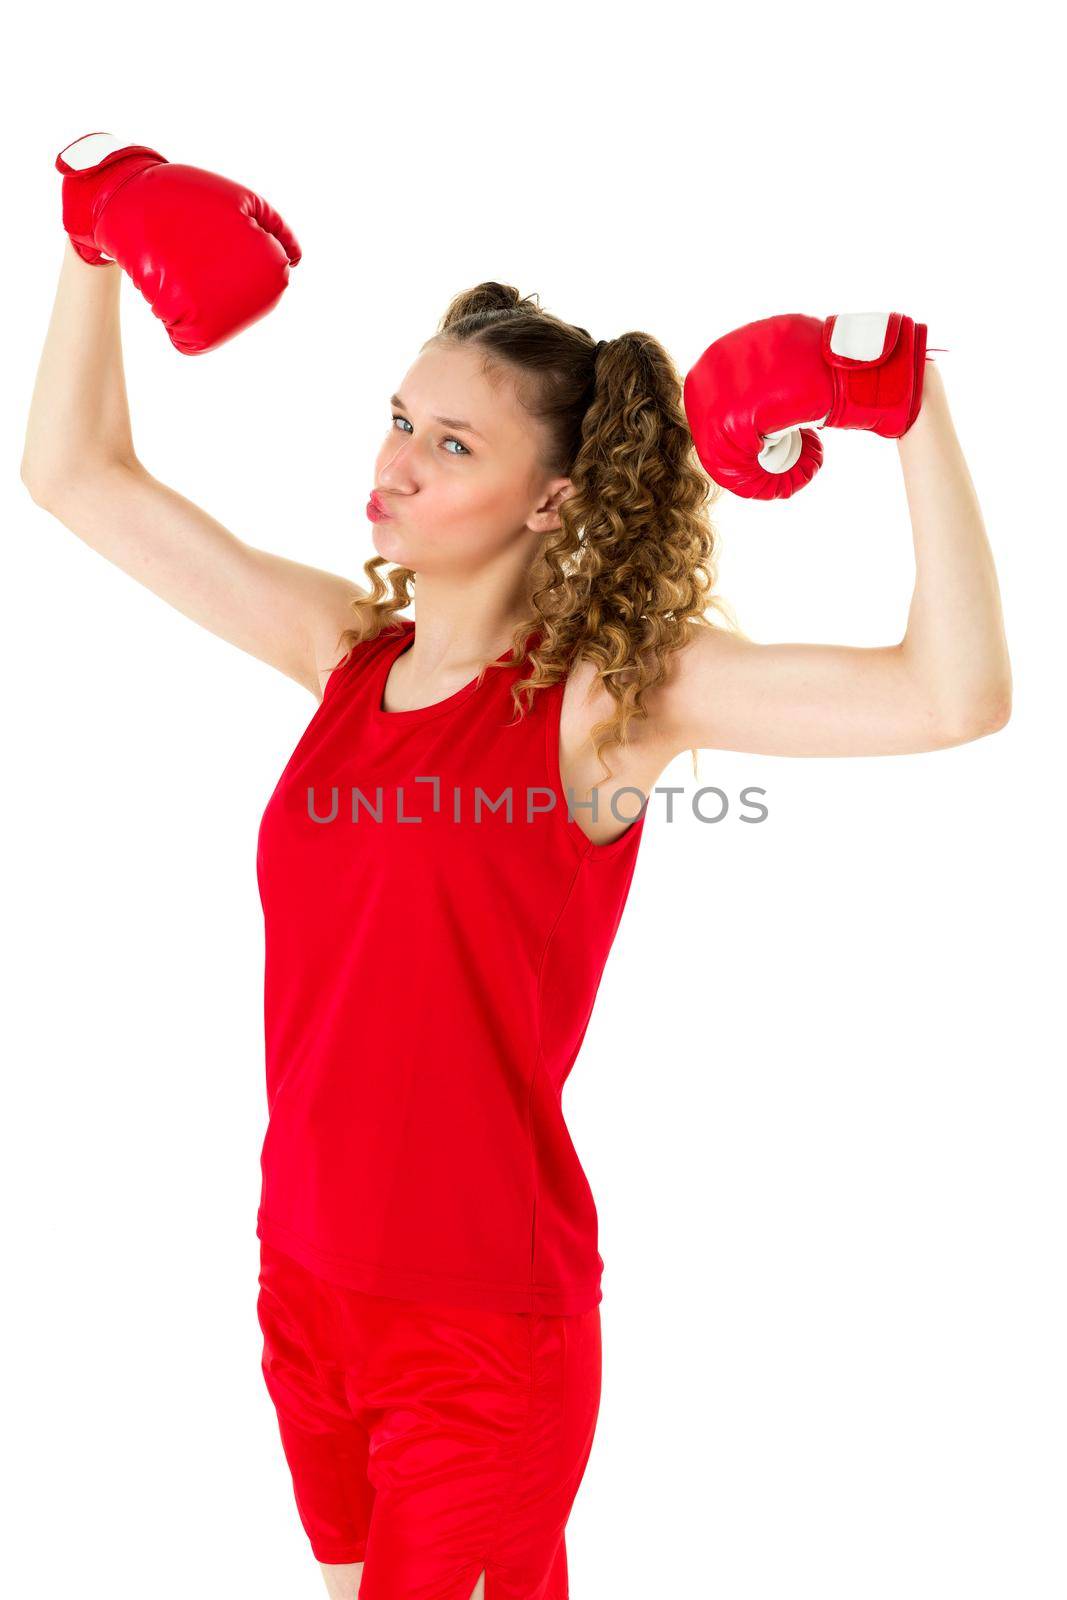 Pretty blonde teen girl boxer showing her muscles. Funny girl athlete with curly hairstyle demonstrating her power against isolated white background. Sports healthy lifestyle, girls power concept